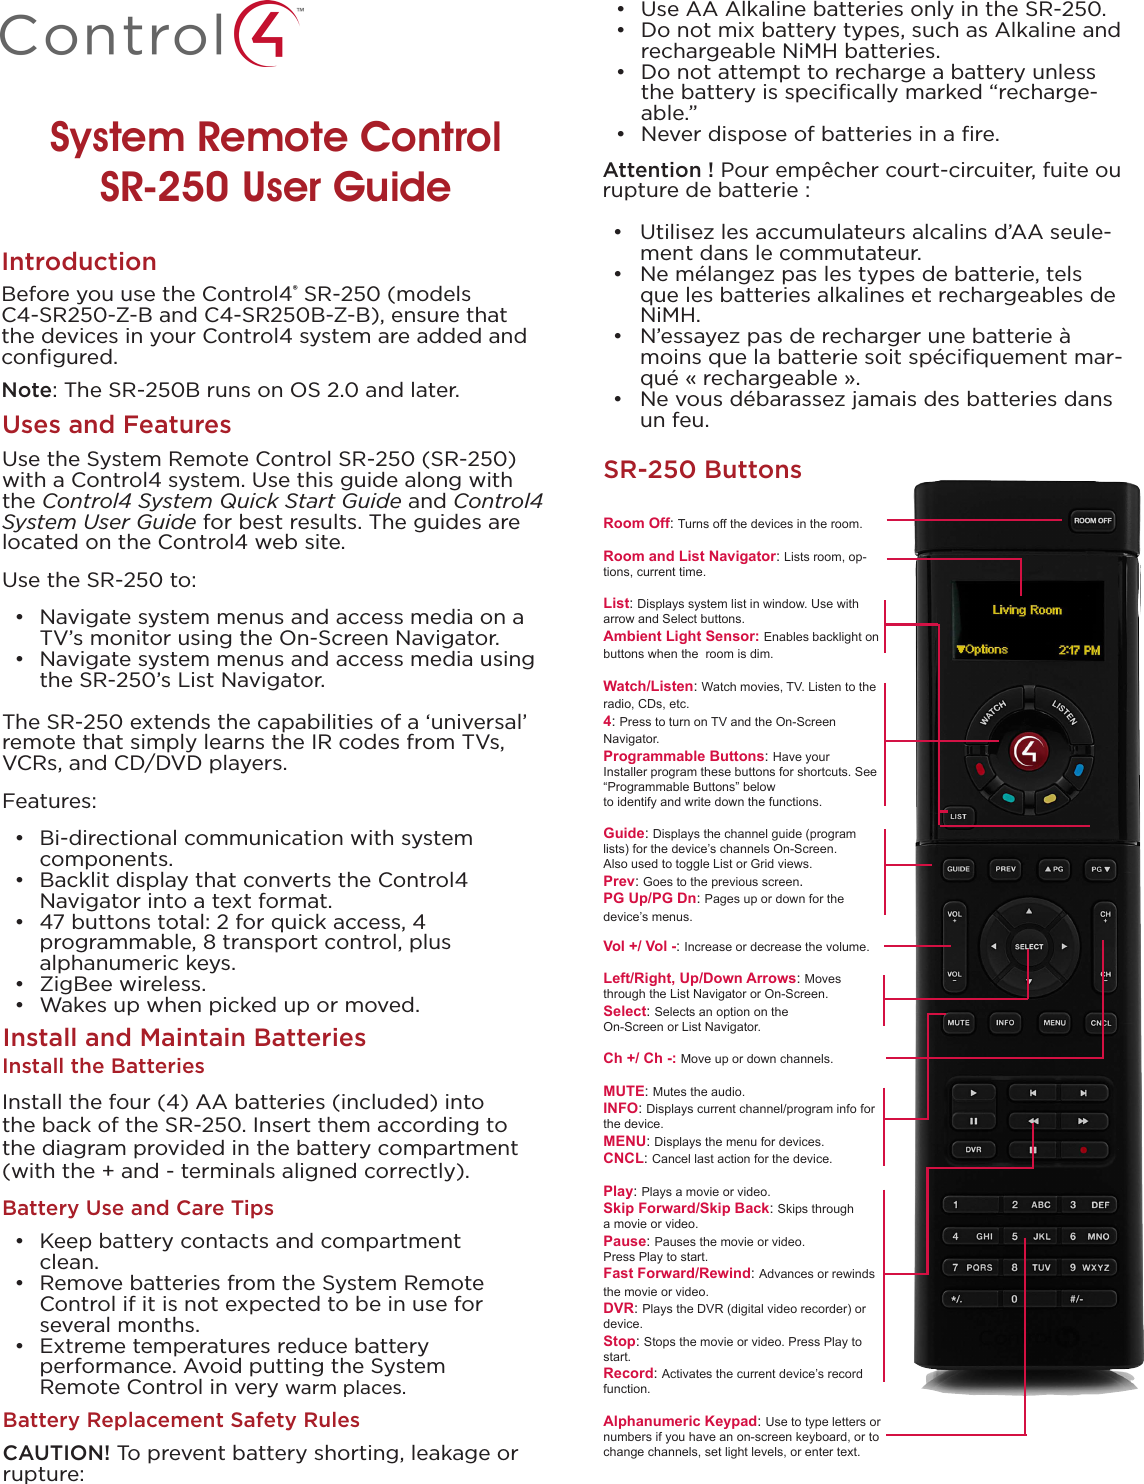 System Remote Control  SR-250 User GuideUses and FeaturesUse the System Remote Control SR-250 (SR-250) with a Control4 system. Use this guide along with the Control4 System Quick Start Guide and Control4 System User Guide for best results. The guides are located on the Control4 web site.Use the SR-250 to:•  Navigate system menus and access media on a TV’s monitor using the On-Screen Navigator.•  Navigate system menus and access media using the SR-250’s List Navigator. The SR-250 extends the capabilities of a ‘universal’ remote that simply learns the IR codes from TVs, VCRs, and CD/DVD players.Features:•  Bi-directional communication with system  components.•  Backlit display that converts the Control4  Navigator into a text format.•  47 buttons total: 2 for quick access, 4  programmable, 8 transport control, plus  alphanumeric keys.•  ZigBee wireless.•  Wakes up when picked up or moved. Before you use the Control4® SR-250 (models C4-SR250-Z-B and C4-SR250B-Z-B), ensure that the devices in your Control4 system are added and conﬁgured.  Note: The SR-250B runs on OS 2.0 and later.IntroductionSR-250 ButtonsInstall the BatteriesInstall the four (4) AA batteries (included) into the back of the SR-250. Insert them according to the diagram provided in the battery compartment (with the + and - terminals aligned correctly).Battery Use and Care Tips•  Keep battery contacts and compartment clean. •  Remove batteries from the System Remote Control if it is not expected to be in use for several months.•  Extreme temperatures reduce battery  performance. Avoid putting the System  Remote Control in very warm places.Install and Maintain BatteriesRoom Off: Turns off the devices in the room.Room and List Navigator: Lists room, op-tions, current time.List: Displays system list in window. Use with arrow and Select buttons.Ambient Light Sensor: Enables backlight on buttons when the  room is dim.Watch/Listen: Watch movies, TV. Listen to the radio, CDs, etc.4: Press to turn on TV and the On-Screen Navigator.Programmable Buttons: Have your Installer program these buttons for shortcuts. See “Programmable Buttons” below  to identify and write down the functions.Guide: Displays the channel guide (program lists) for the device’s channels On-Screen.  Also used to toggle List or Grid views.Prev: Goes to the previous screen.PG Up/PG Dn: Pages up or down for the device’s menus.Vol +/ Vol -: Increase or decrease the volume.Left/Right, Up/Down Arrows: Moves through the List Navigator or On-Screen.Select: Selects an option on the On-Screen or List Navigator.Ch +/ Ch -: Move up or down channels.MUTE: Mutes the audio.INFO: Displays current channel/program info for the device.MENU: Displays the menu for devices.CNCL: Cancel last action for the device.Play: Plays a movie or video.Skip Forward/Skip Back: Skips through a movie or video.Pause: Pauses the movie or video. Press Play to start.Fast Forward/Rewind: Advances or rewinds the movie or video.DVR: Plays the DVR (digital video recorder) or device.Stop: Stops the movie or video. Press Play to start.Record: Activates the current device’s record function.Alphanumeric Keypad: Use to type letters or numbers if you have an on-screen keyboard, or to change channels, set light levels, or enter text.•  Use AA Alkaline batteries only in the SR-250.  •  Do not mix battery types, such as Alkaline and rechargeable NiMH batteries. •  Do not attempt to recharge a battery unless the battery is speciﬁcally marked “recharge-able.”•  Never dispose of batteries in a ﬁre.Attention ! Pour empêcher court-circuiter, fuite ou rupture de batterie :•  Utilisez les accumulateurs alcalins d’AA seule-ment dans le commutateur. •  Ne mélangez pas les types de batterie, tels que les batteries alkalines et rechargeables de NiMH.•  N’essayez pas de recharger une batterie à moins que la batterie soit spéciﬁquement mar-qué « rechargeable ».•  Ne vous débarassez jamais des batteries dans un feu. Battery Replacement Safety RulesCAUTION! To prevent battery shorting, leakage or rupture: 